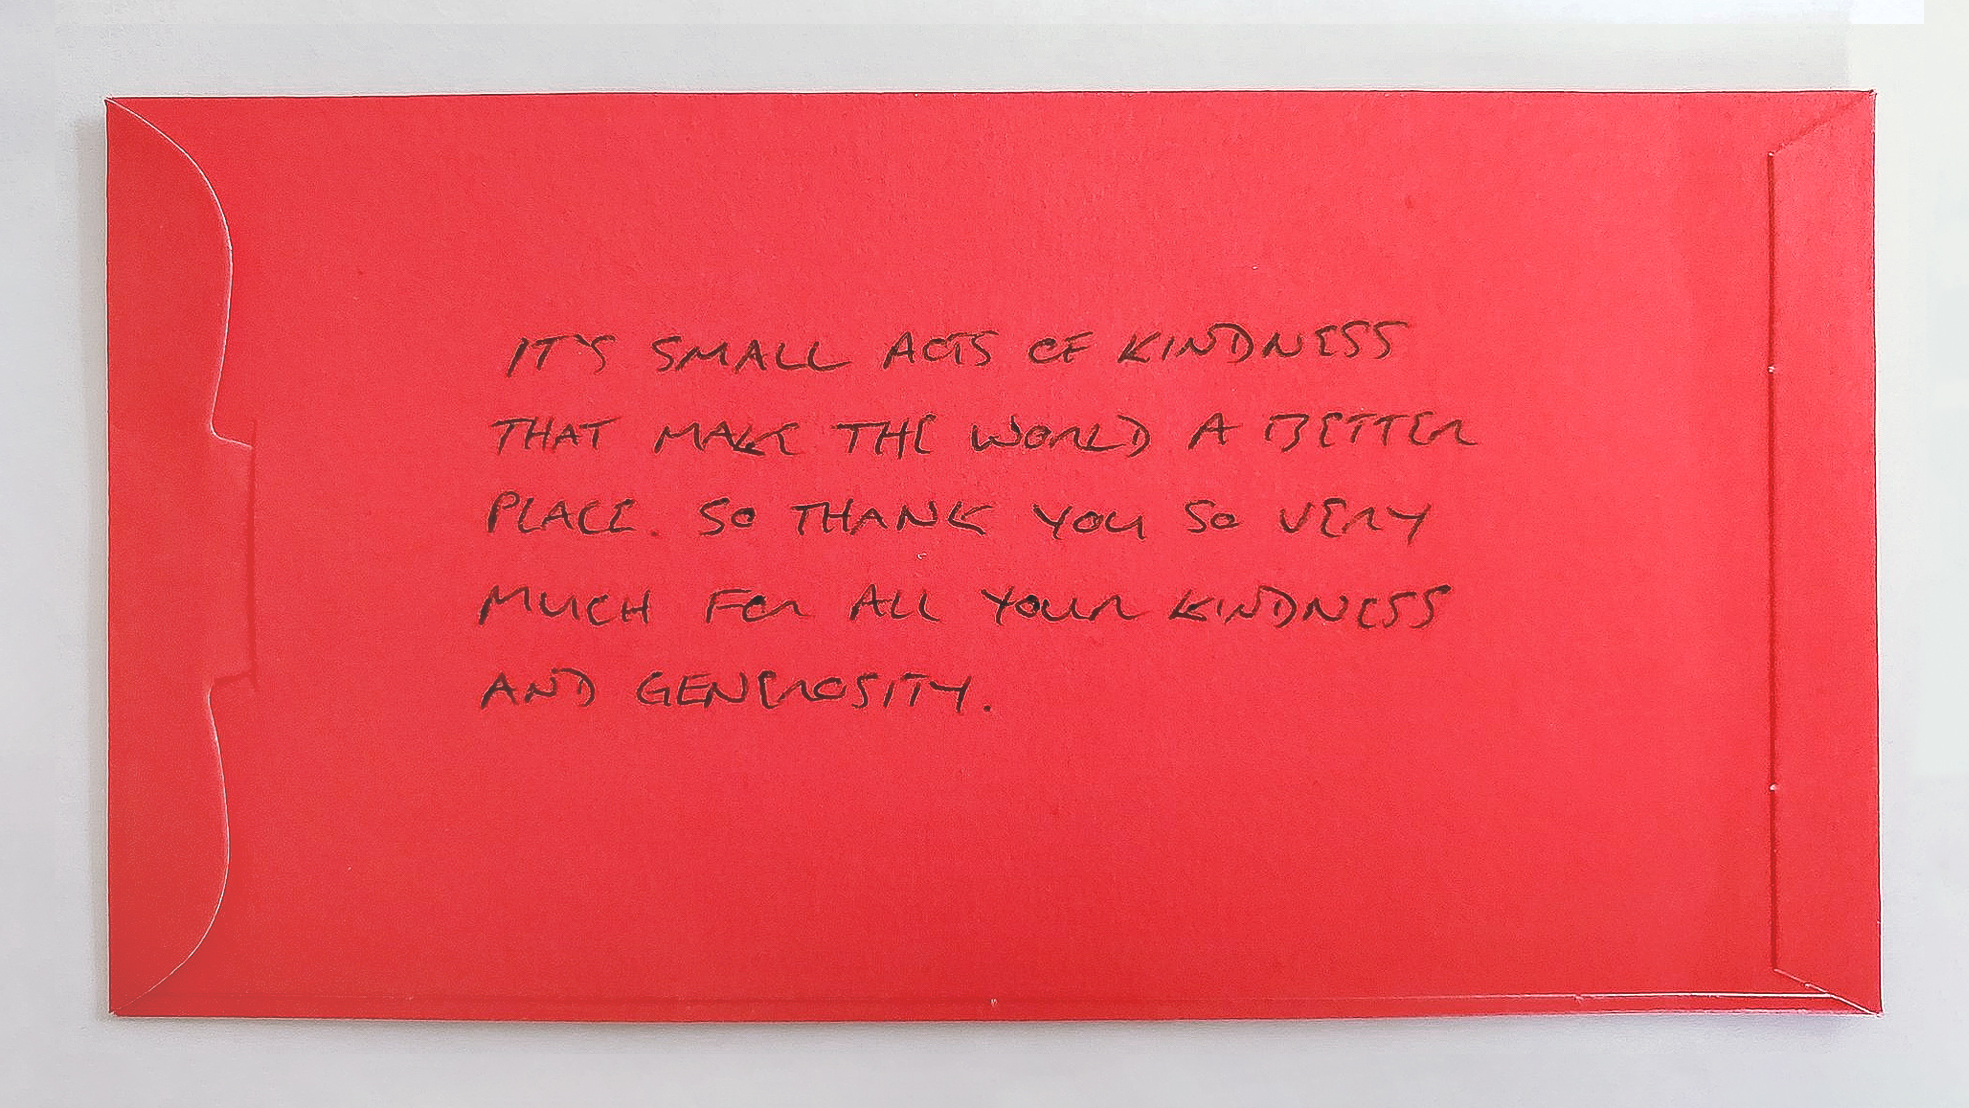 A red, thank you note that says: "It's small acts of kindness that makes the world a better place. So thank you so very much for all your kindness and generosity."